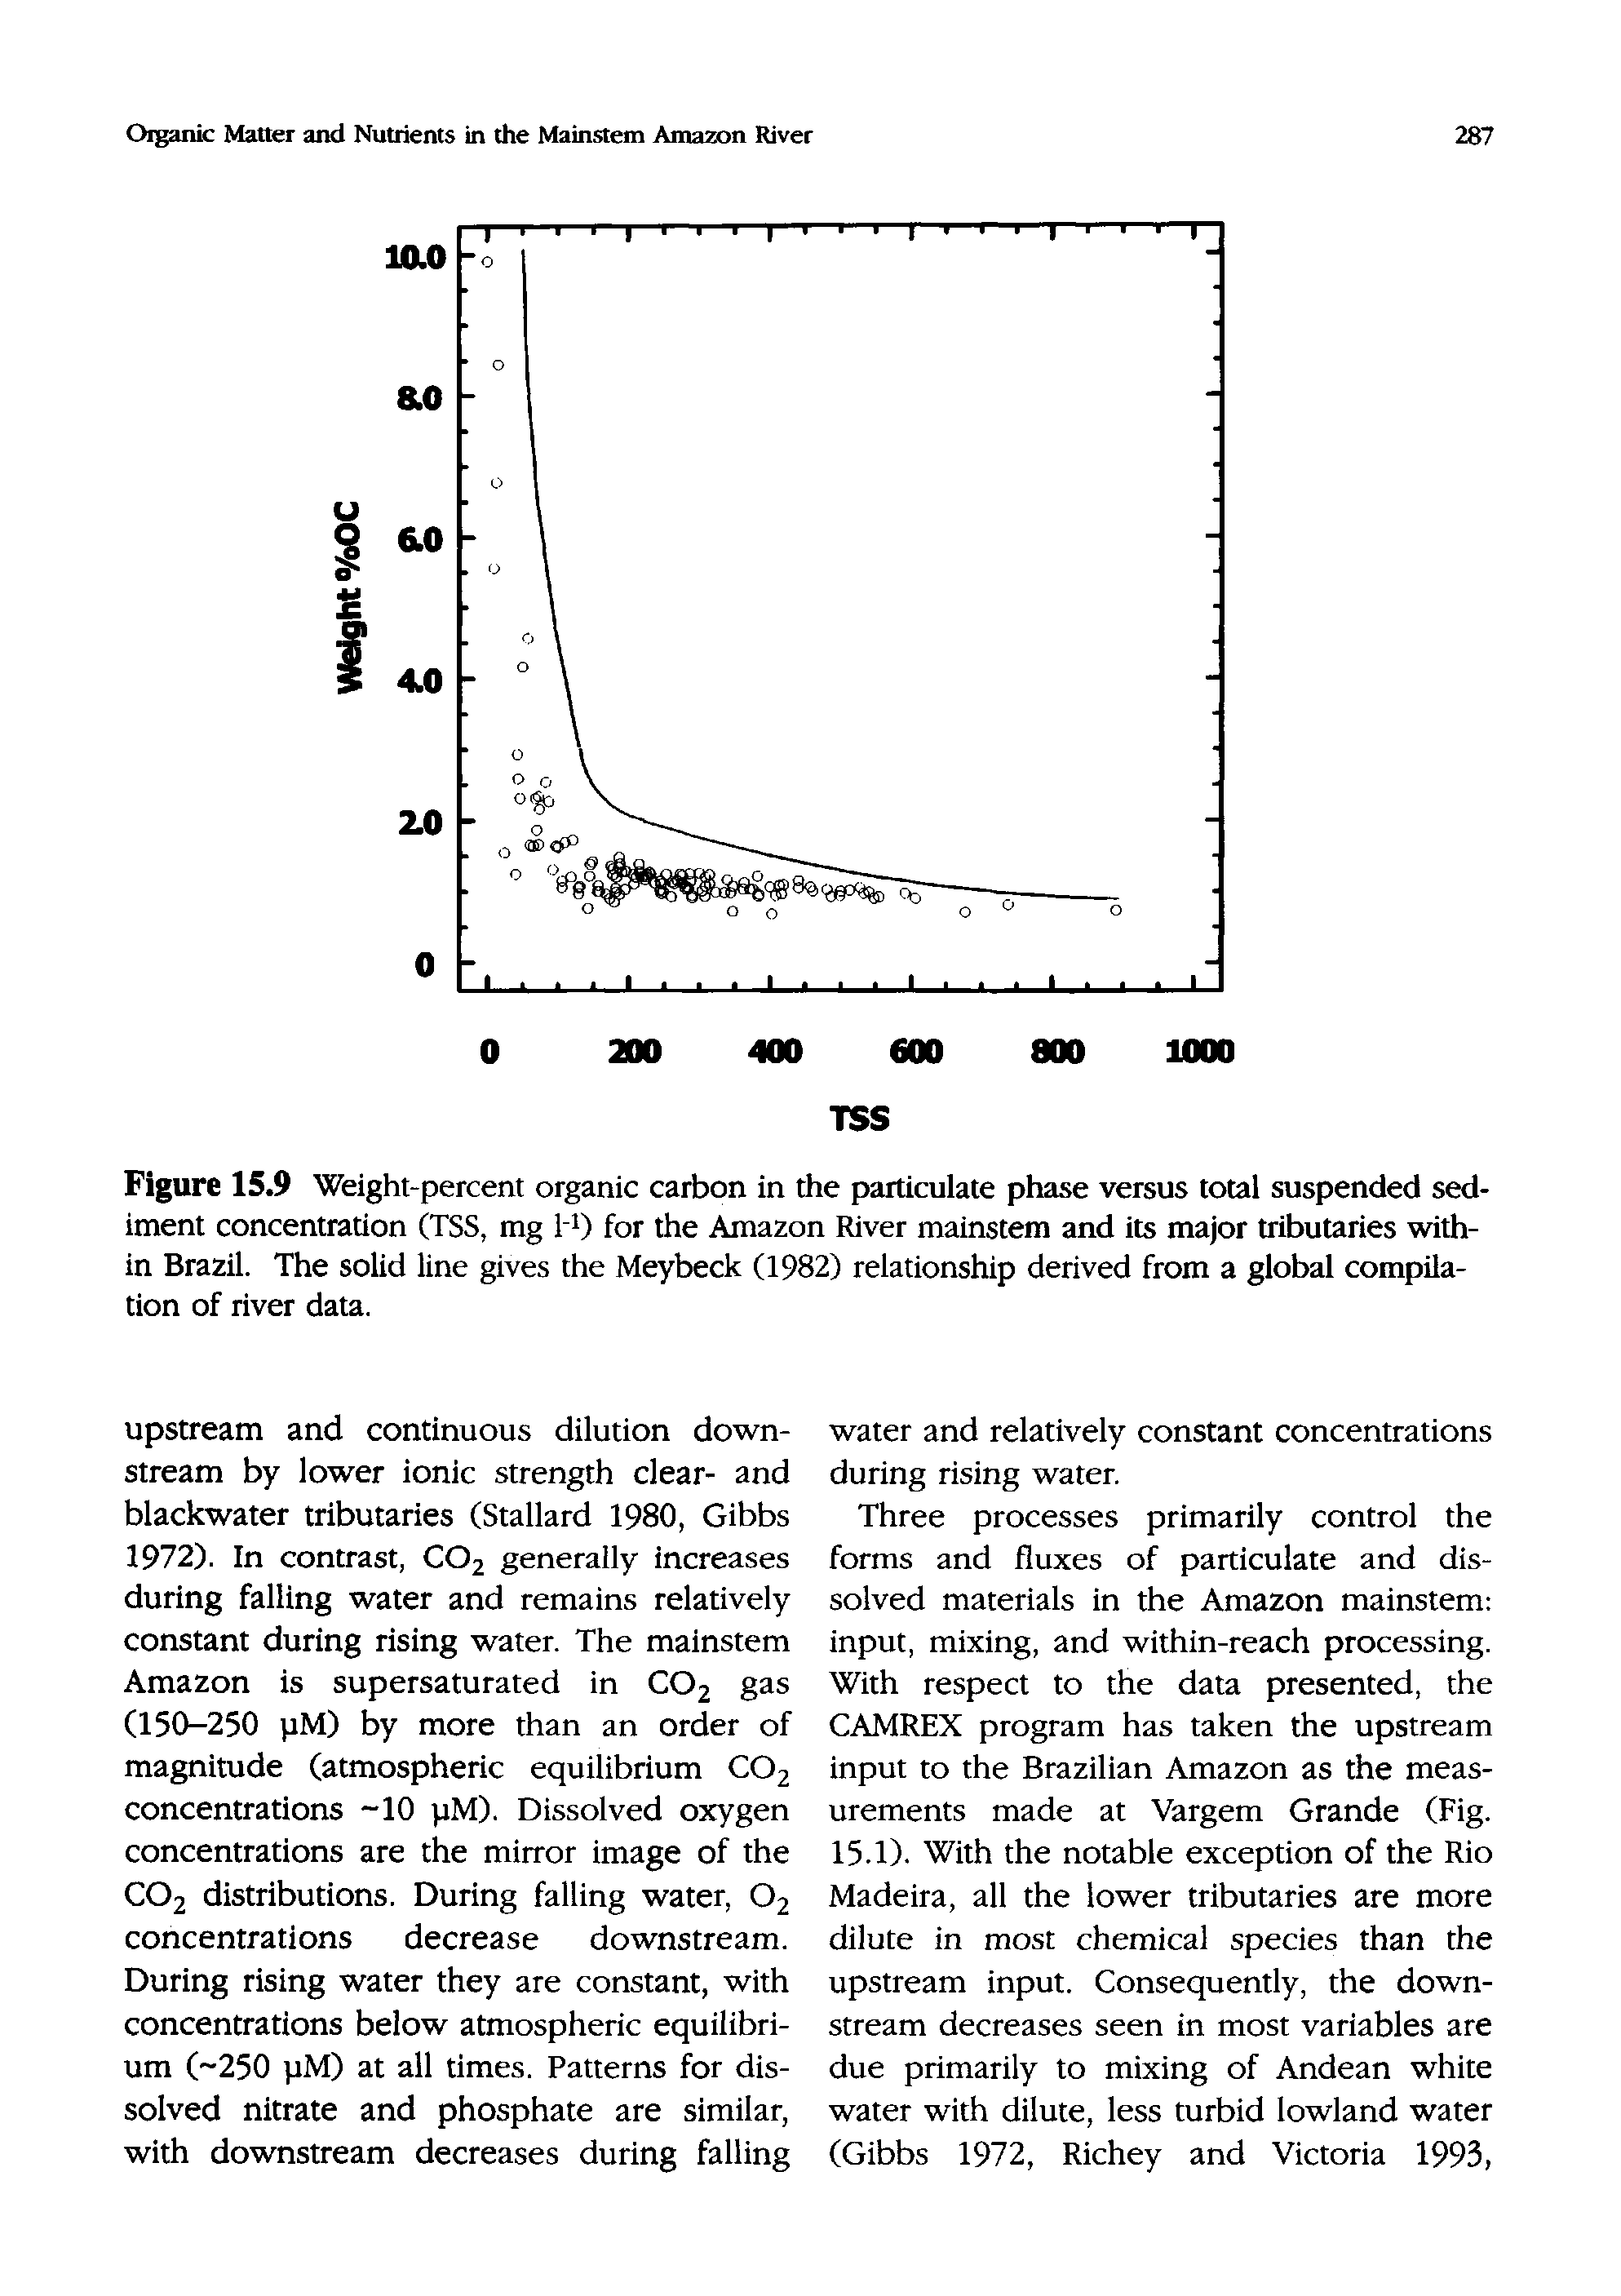 Figure 15.9 Weight-percent organic carbon in the particulate phase versus total suspended sediment concentration (TSS, mg l O for the Amazon River mainstem and its major tributaries within Brazil. The solid line gives the Meybeck (1982) relationship derived from a global compilation of river data.